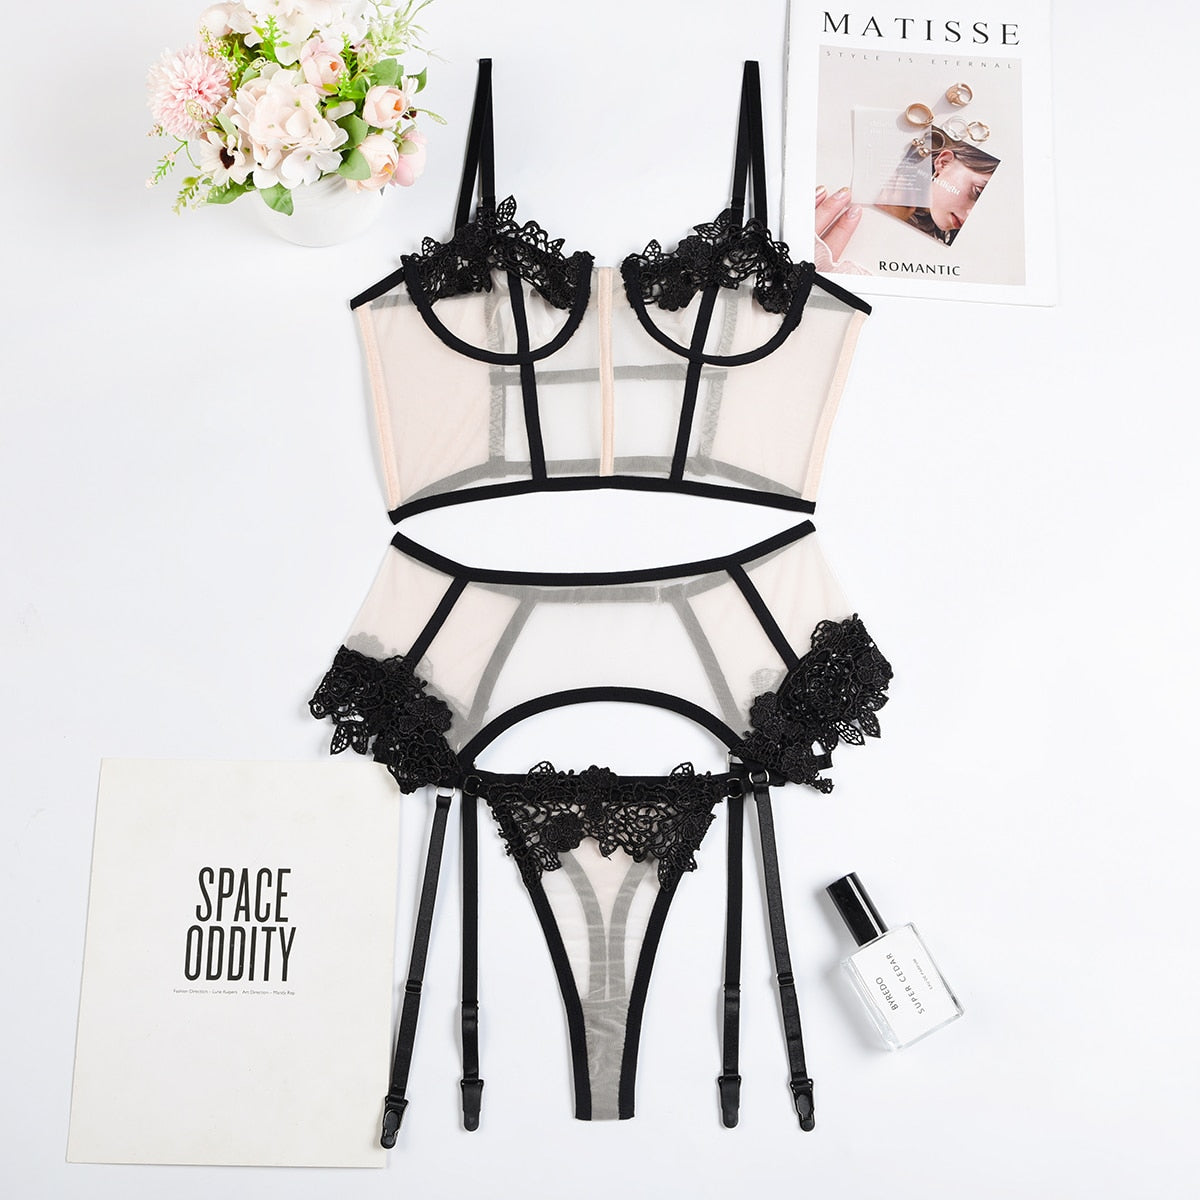 Sheer Nights See Through Lace Lingerie Set